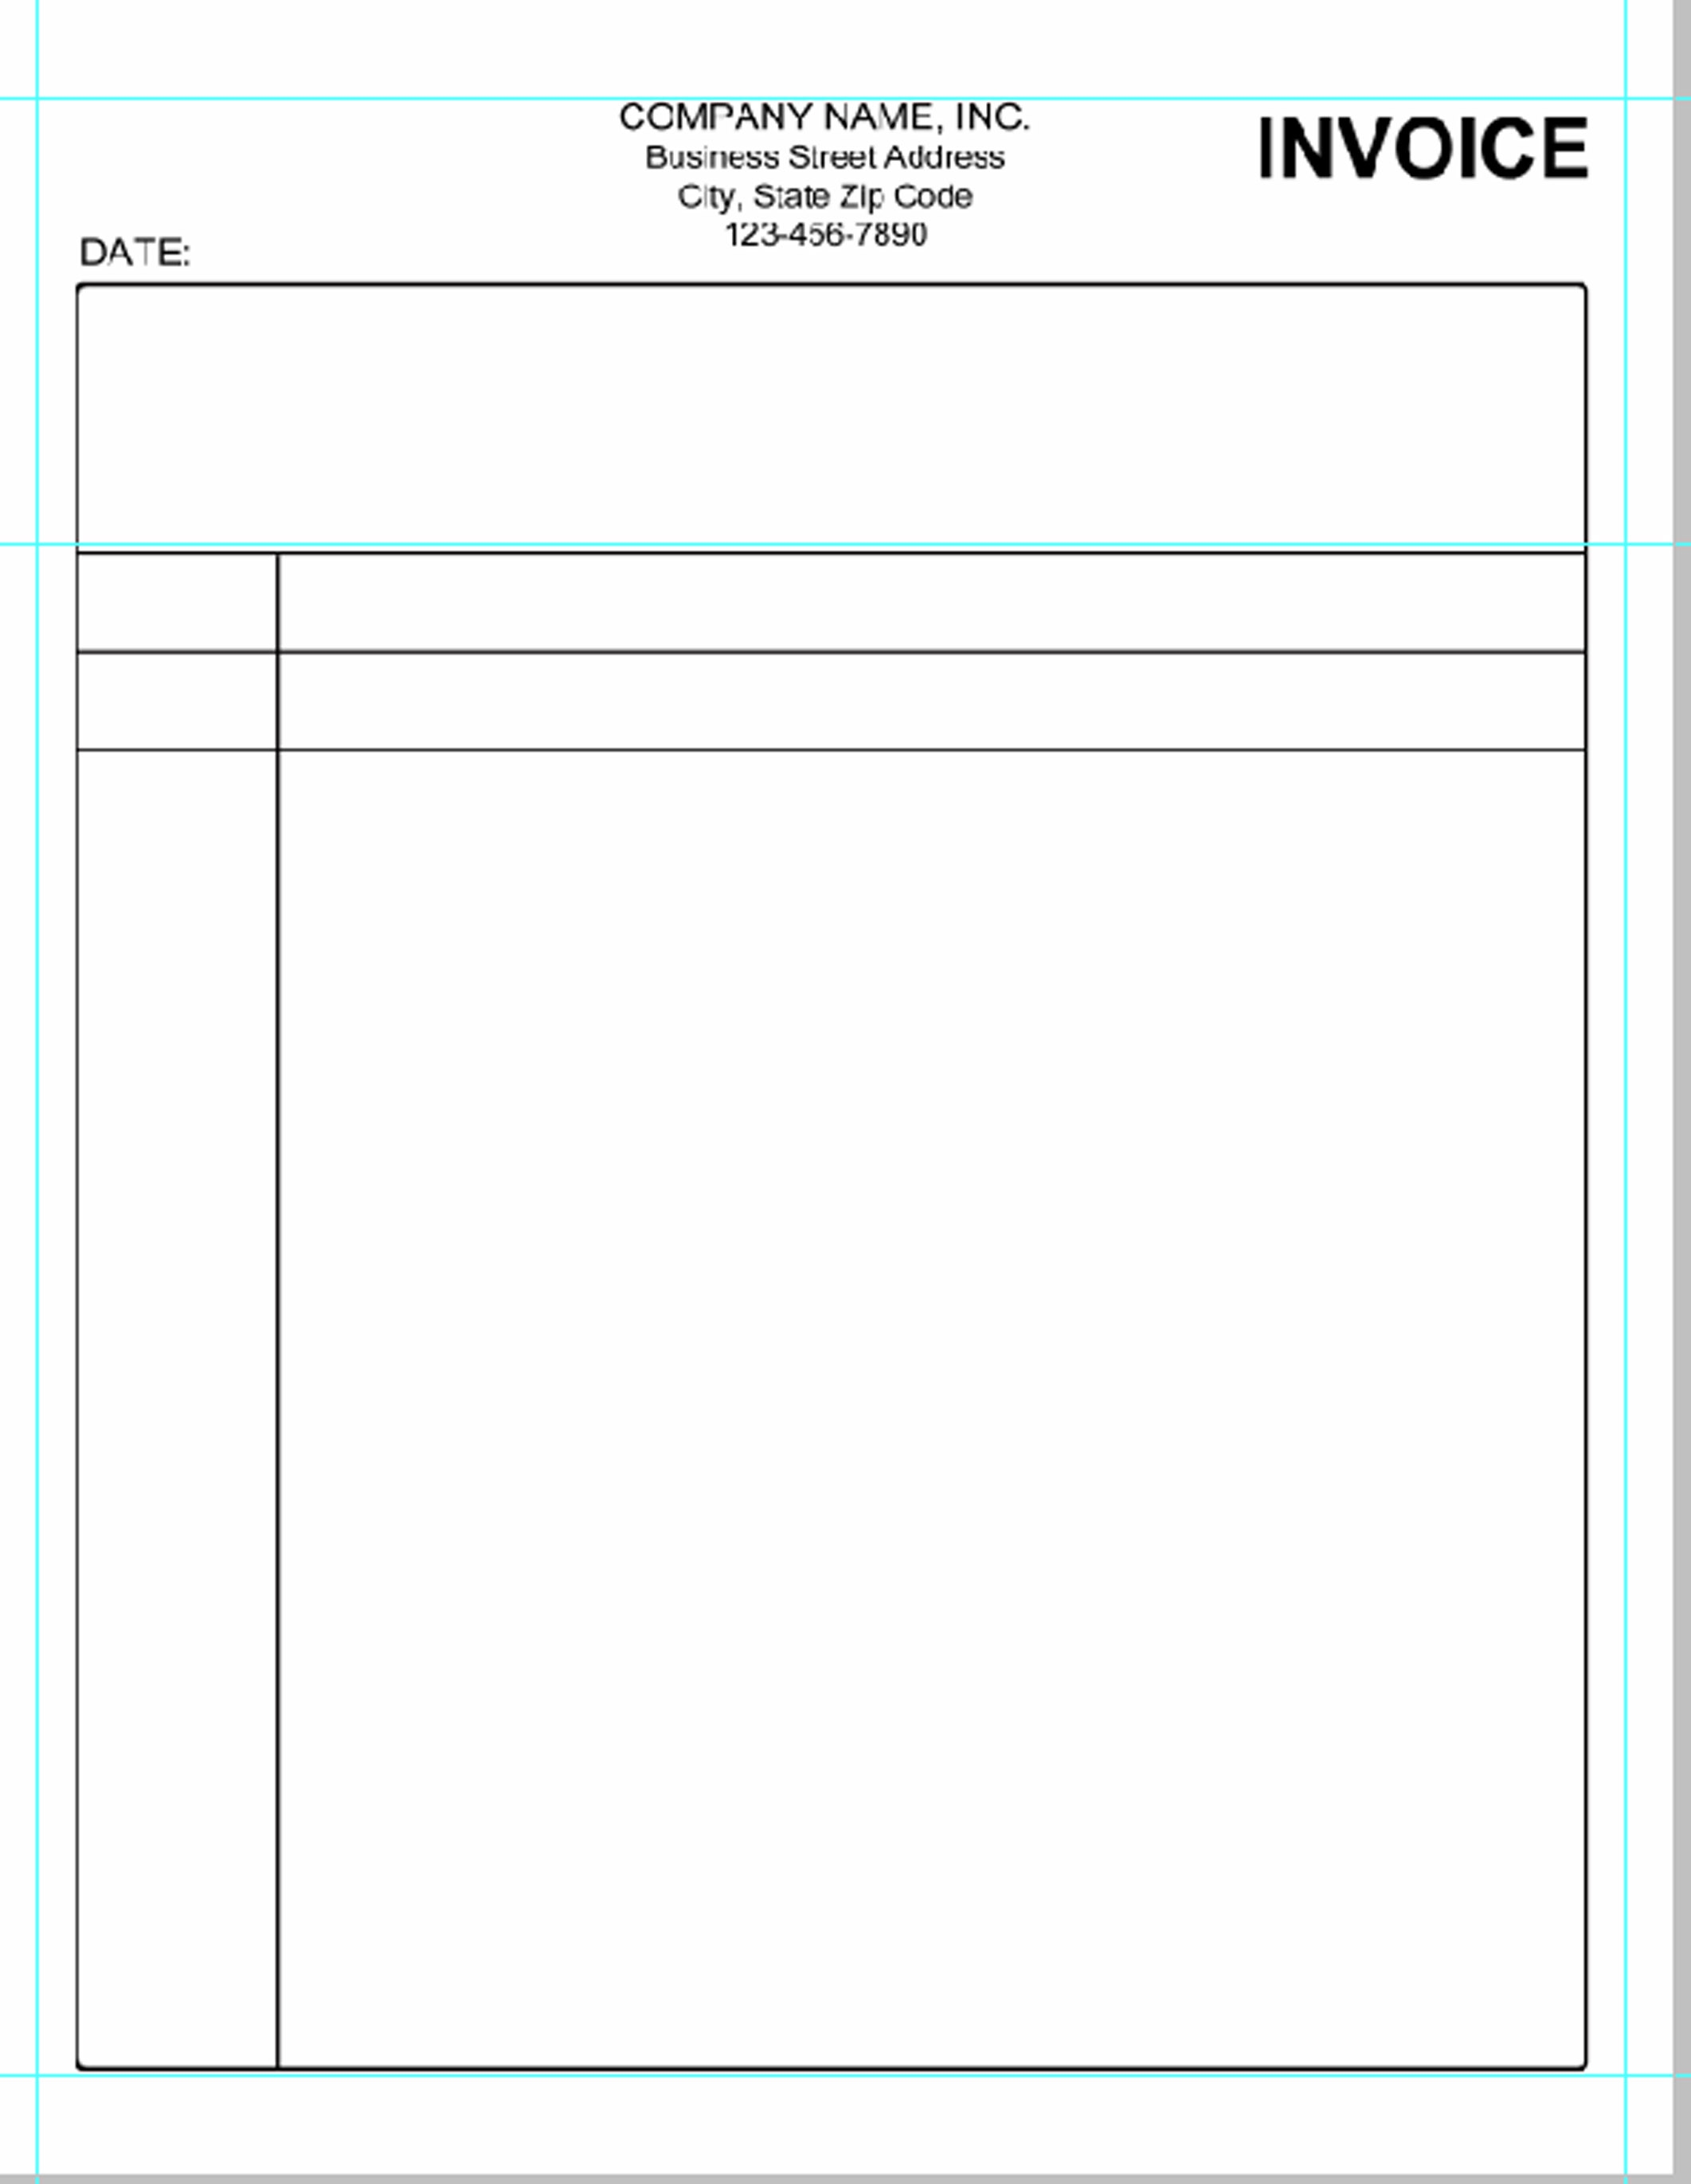 free blank invoice template 10 samples blank invoice templates free and mistakes in business 2123 X 2742